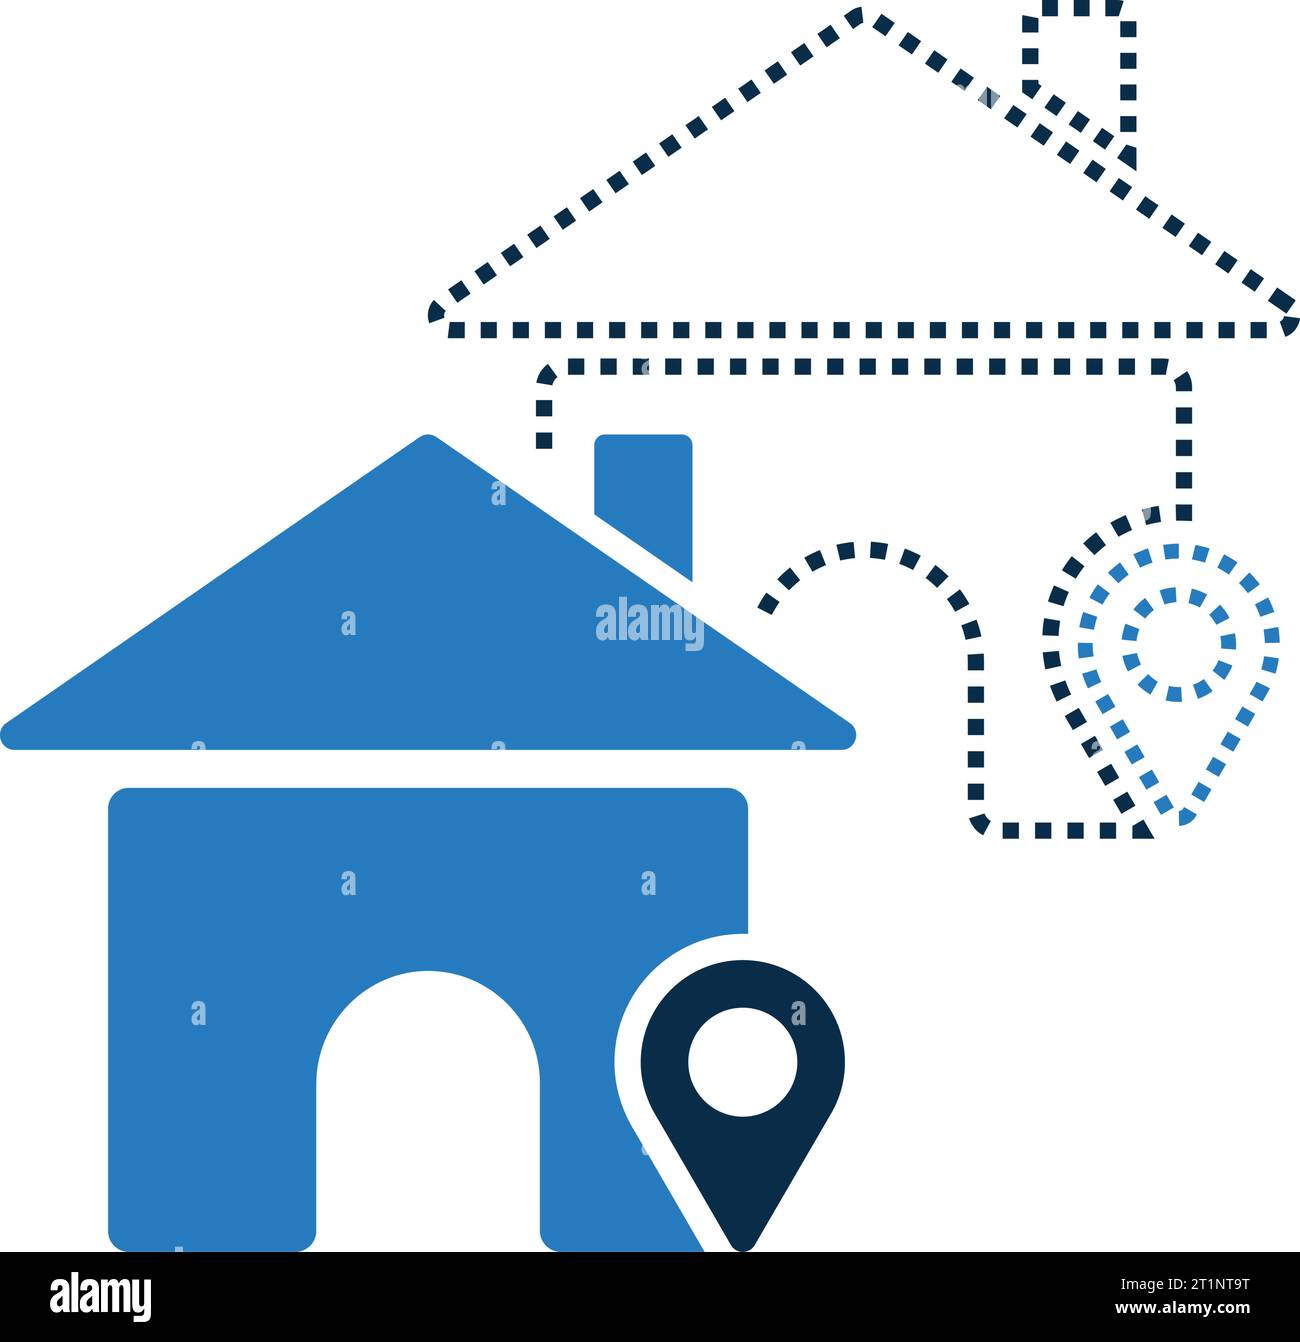 Home Location Icon. using in commercial purposes, print media, web or any type of design projects. Stock Vector